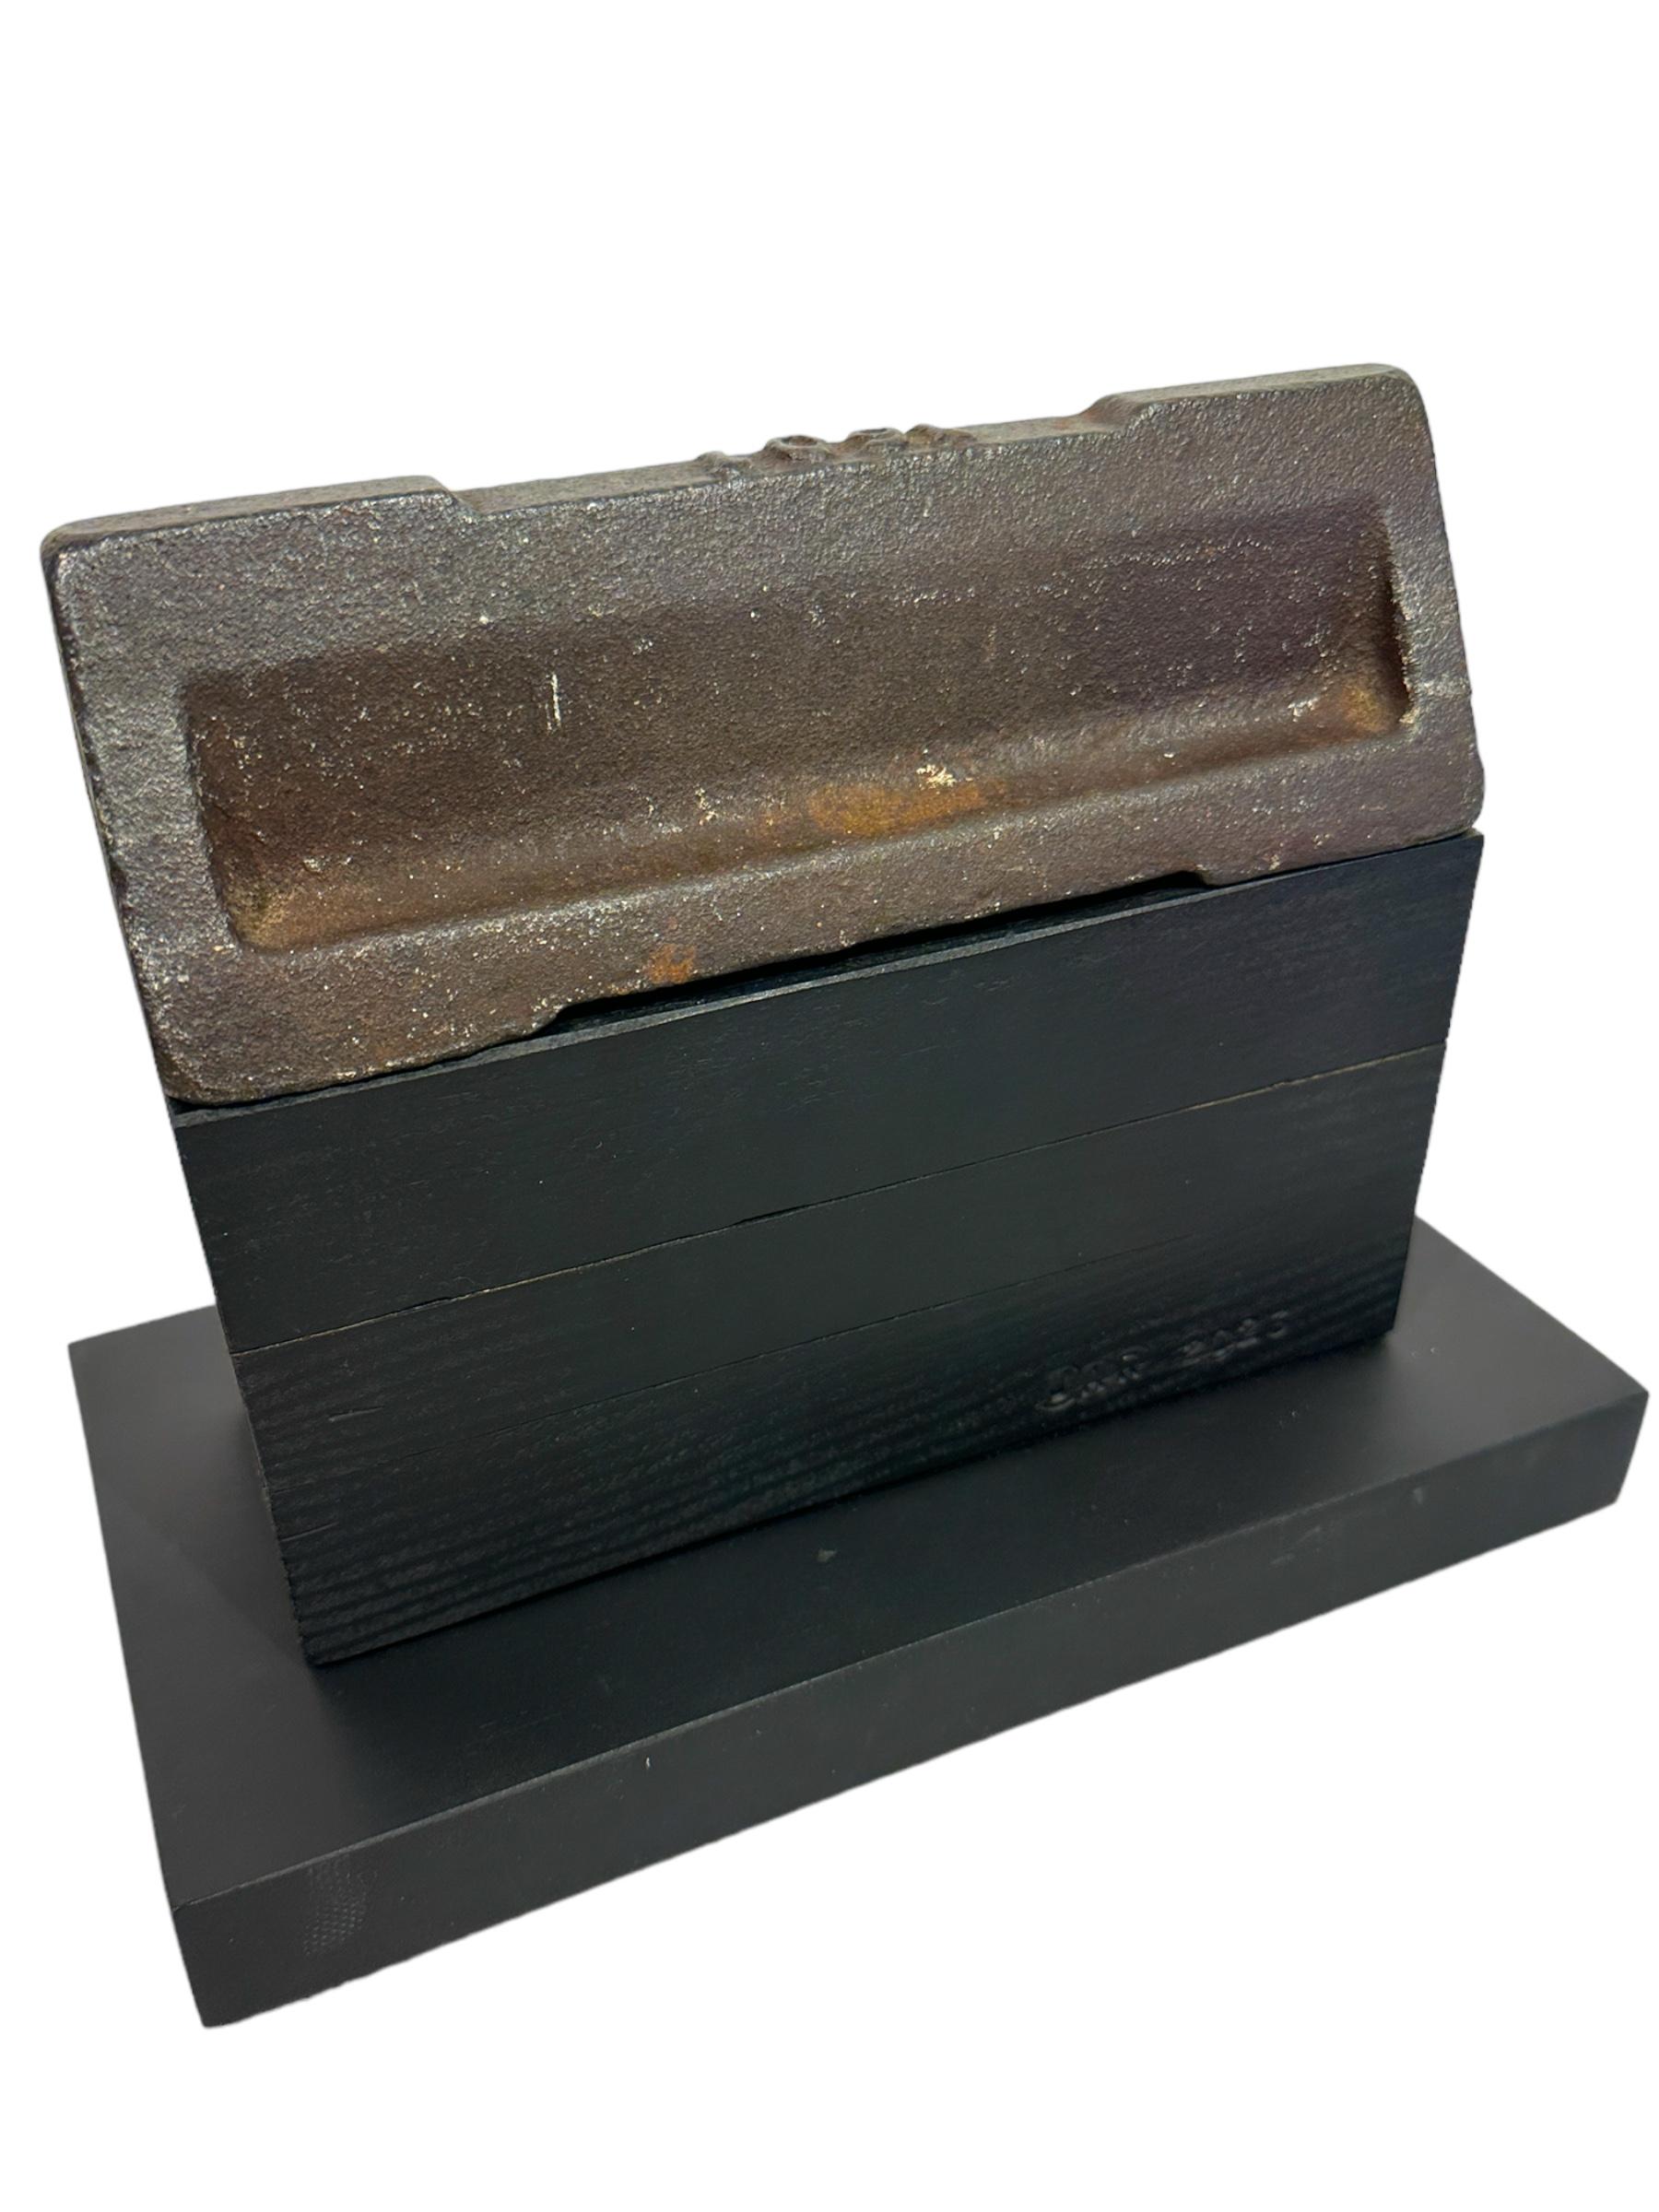 Contemporary House Sculpture, Minimalist Modern Structure, Rusted Steel Wedge on Wood Blocks For Sale